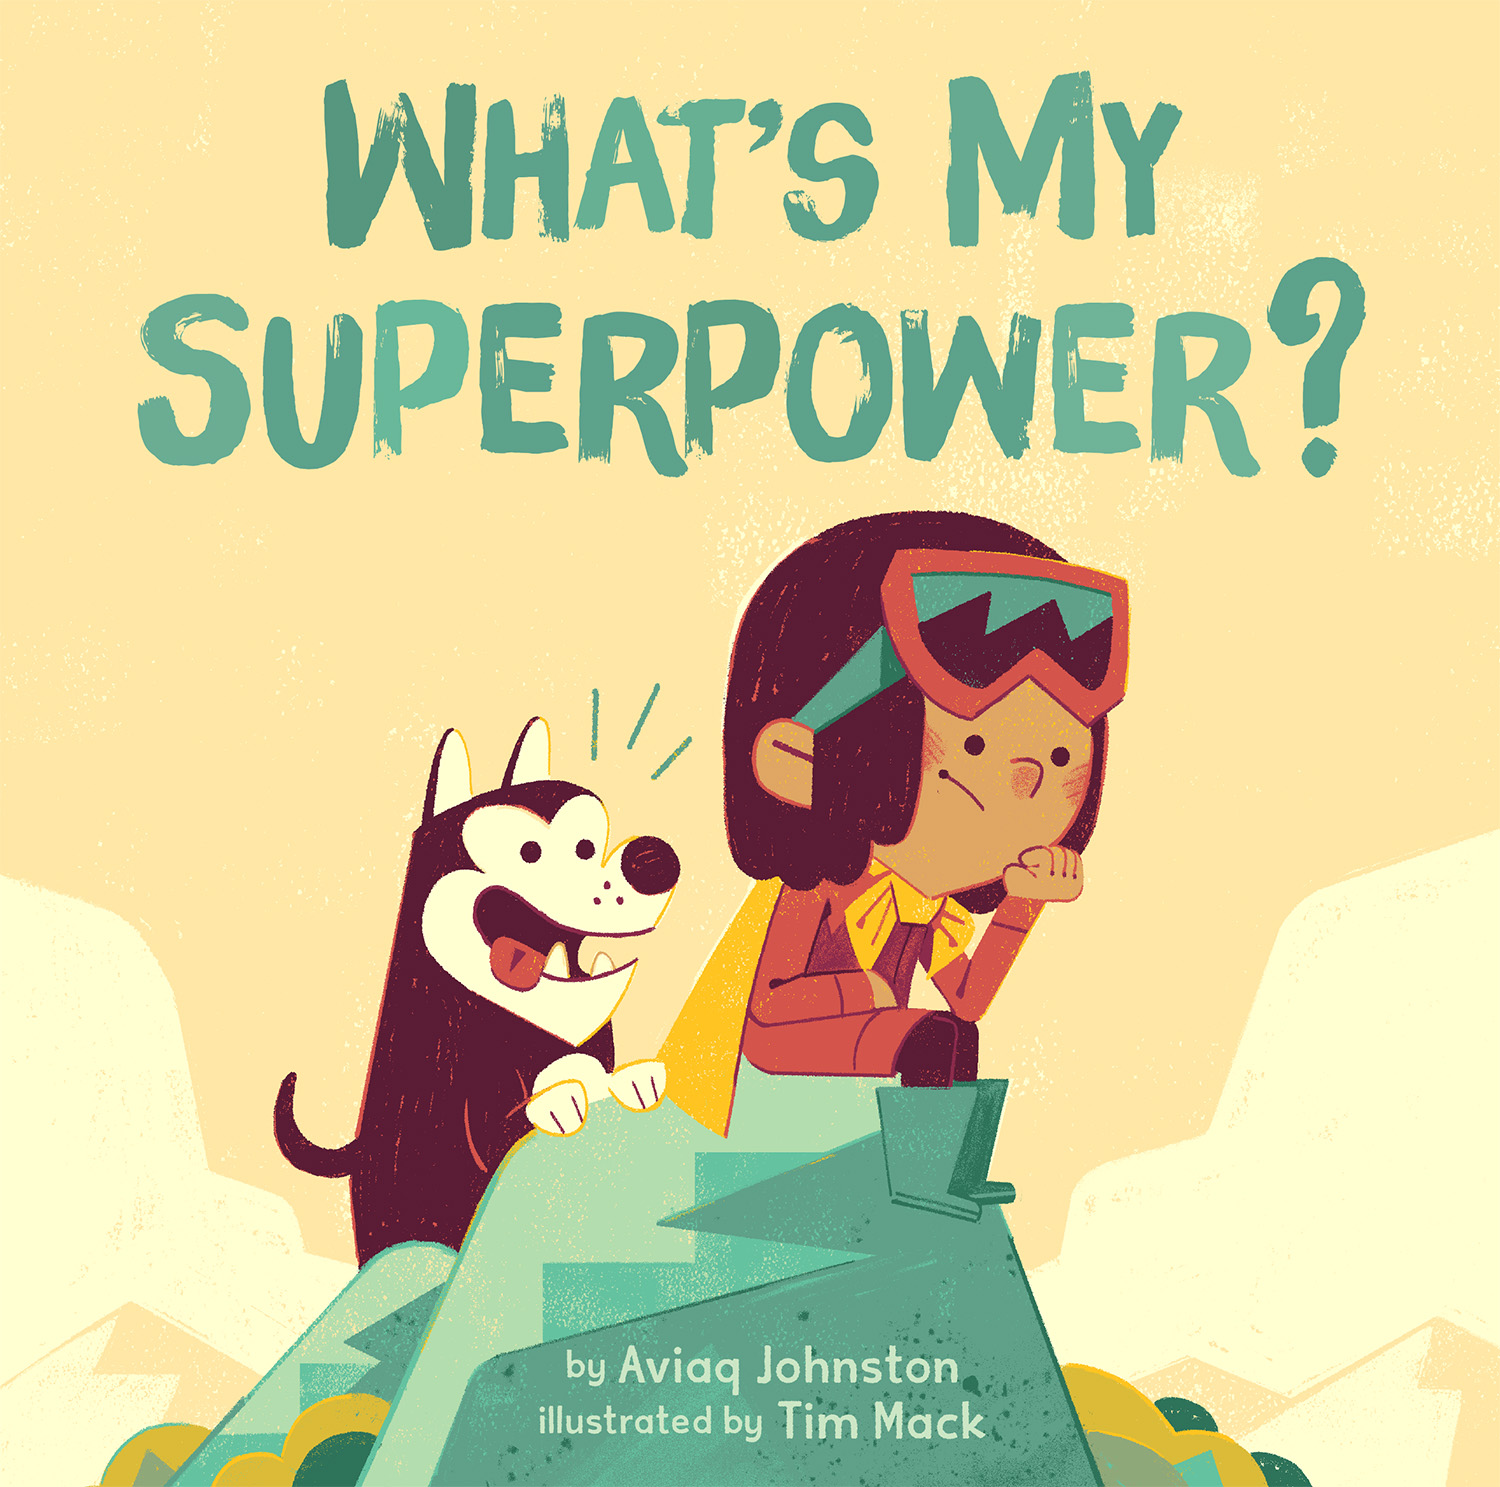 What’s My Superpower? by Aviaq Johnston, illustrated by Tim Mack